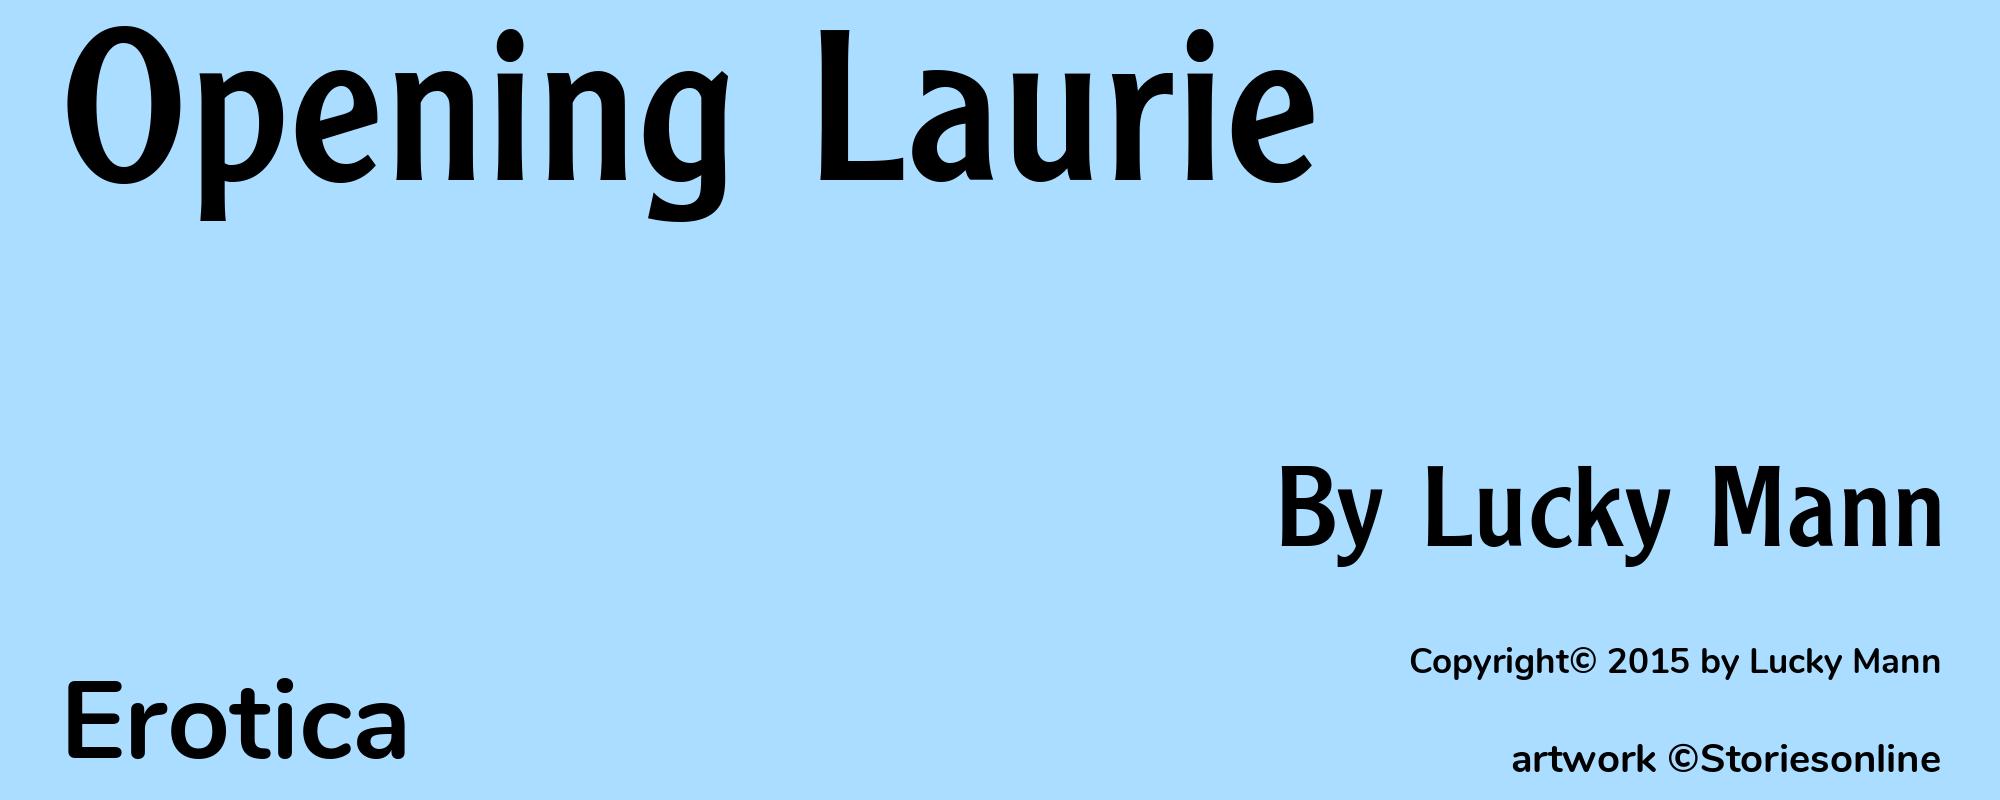 Opening Laurie - Cover